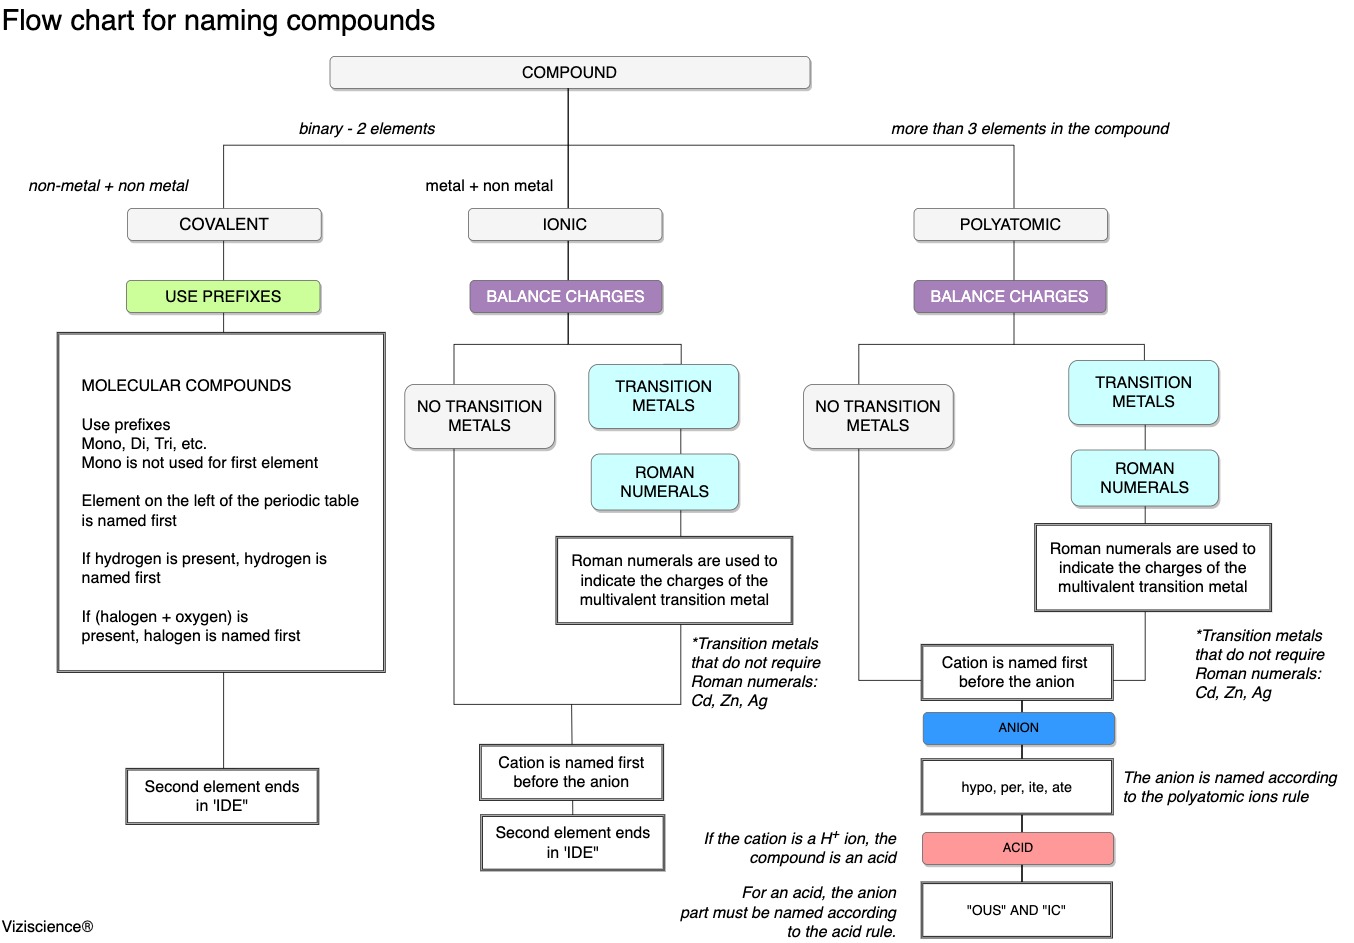 Flow chart for naming compounds.